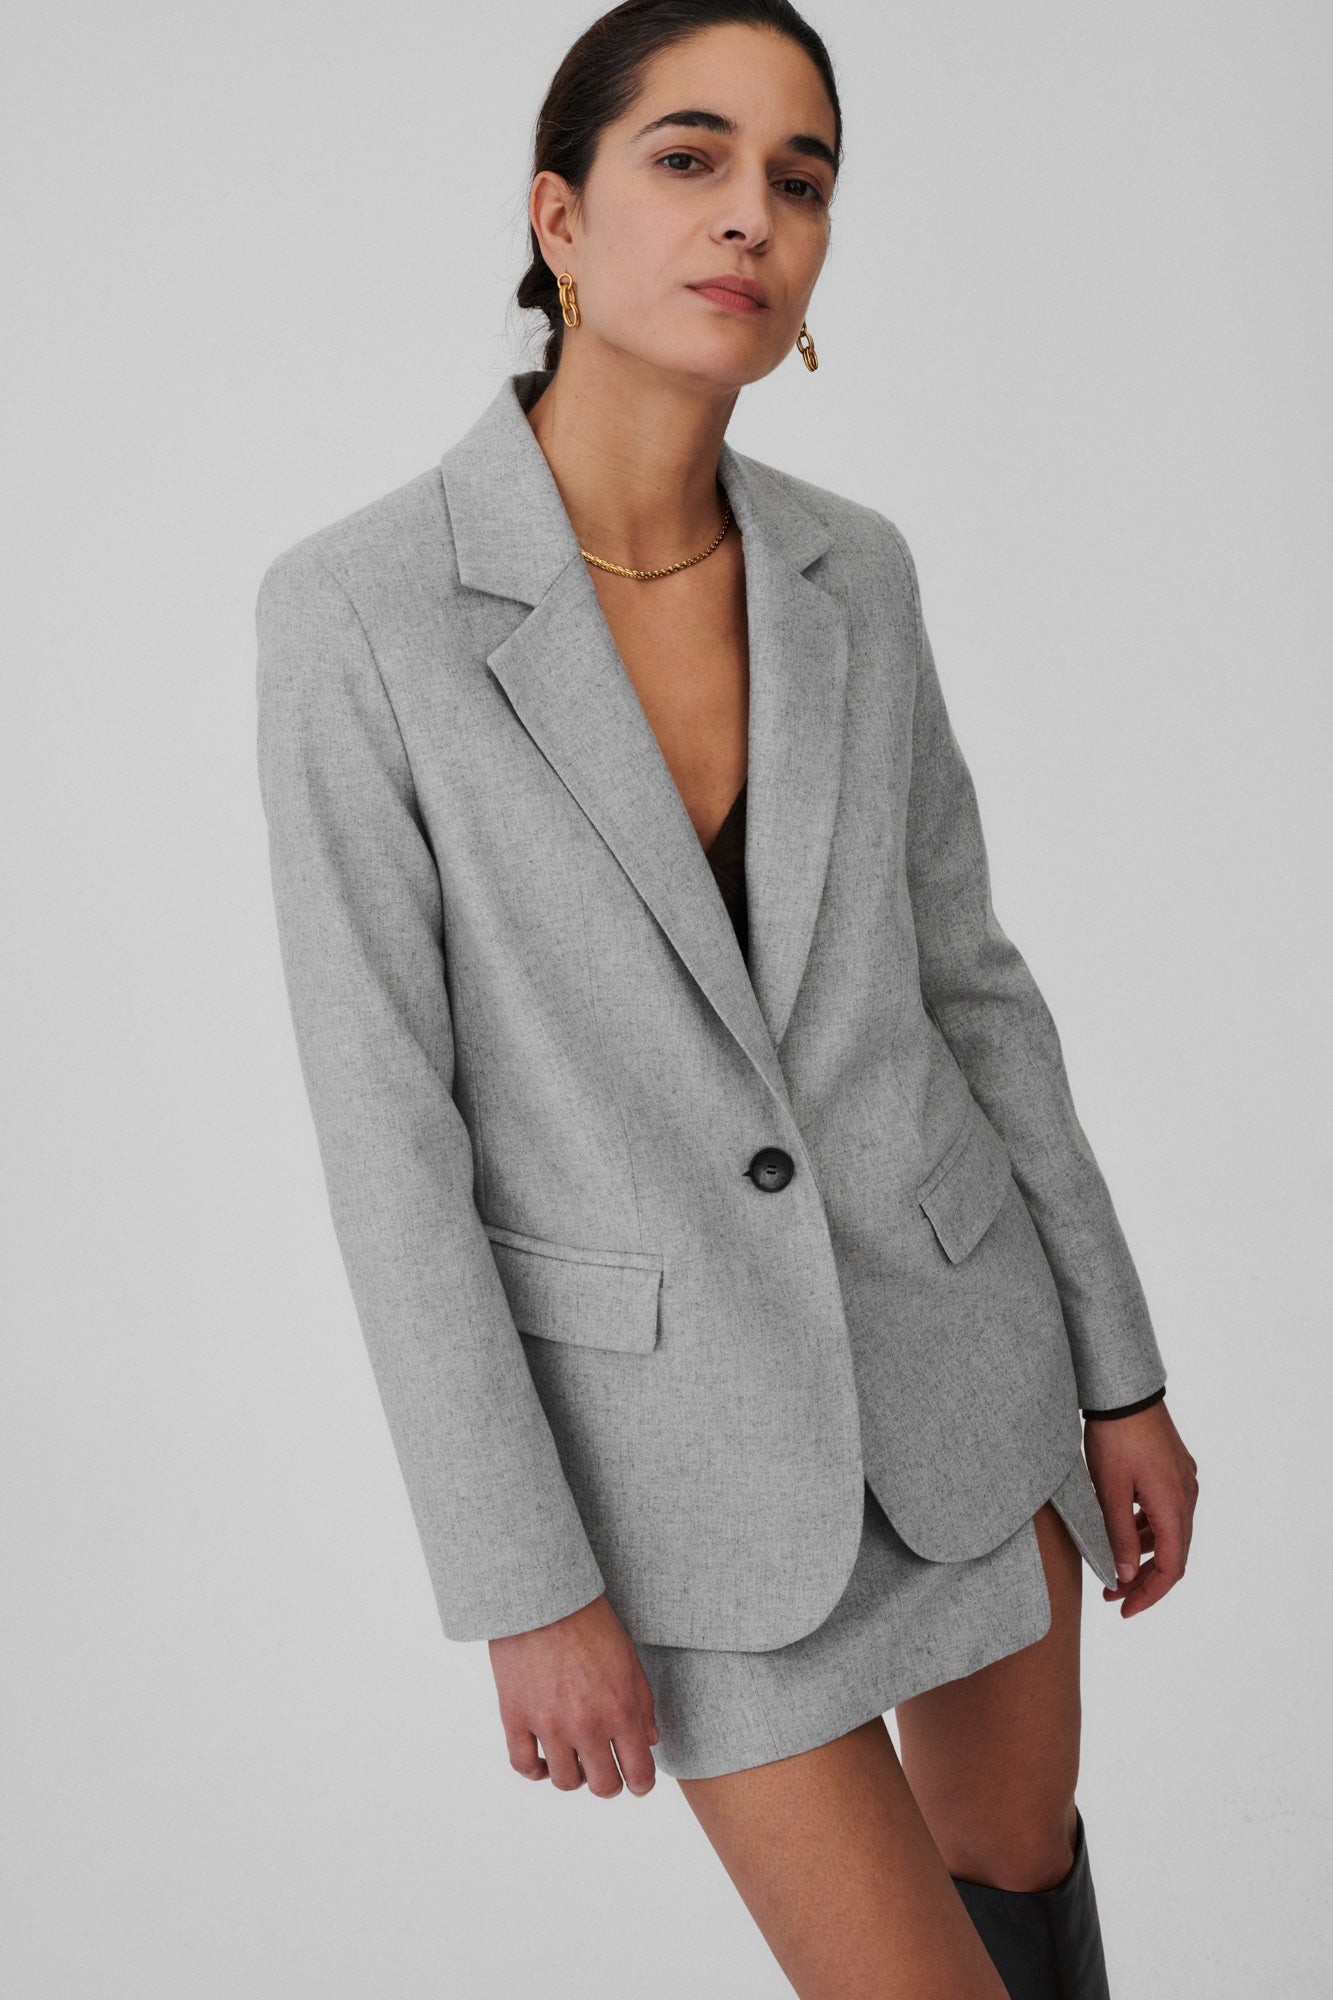 Recycled wool blend blazer / 18 / 04 / cloud grey *wool-blend-skirt-07-02-cloud-grey* ?The model is 176cm tall and wears size S?